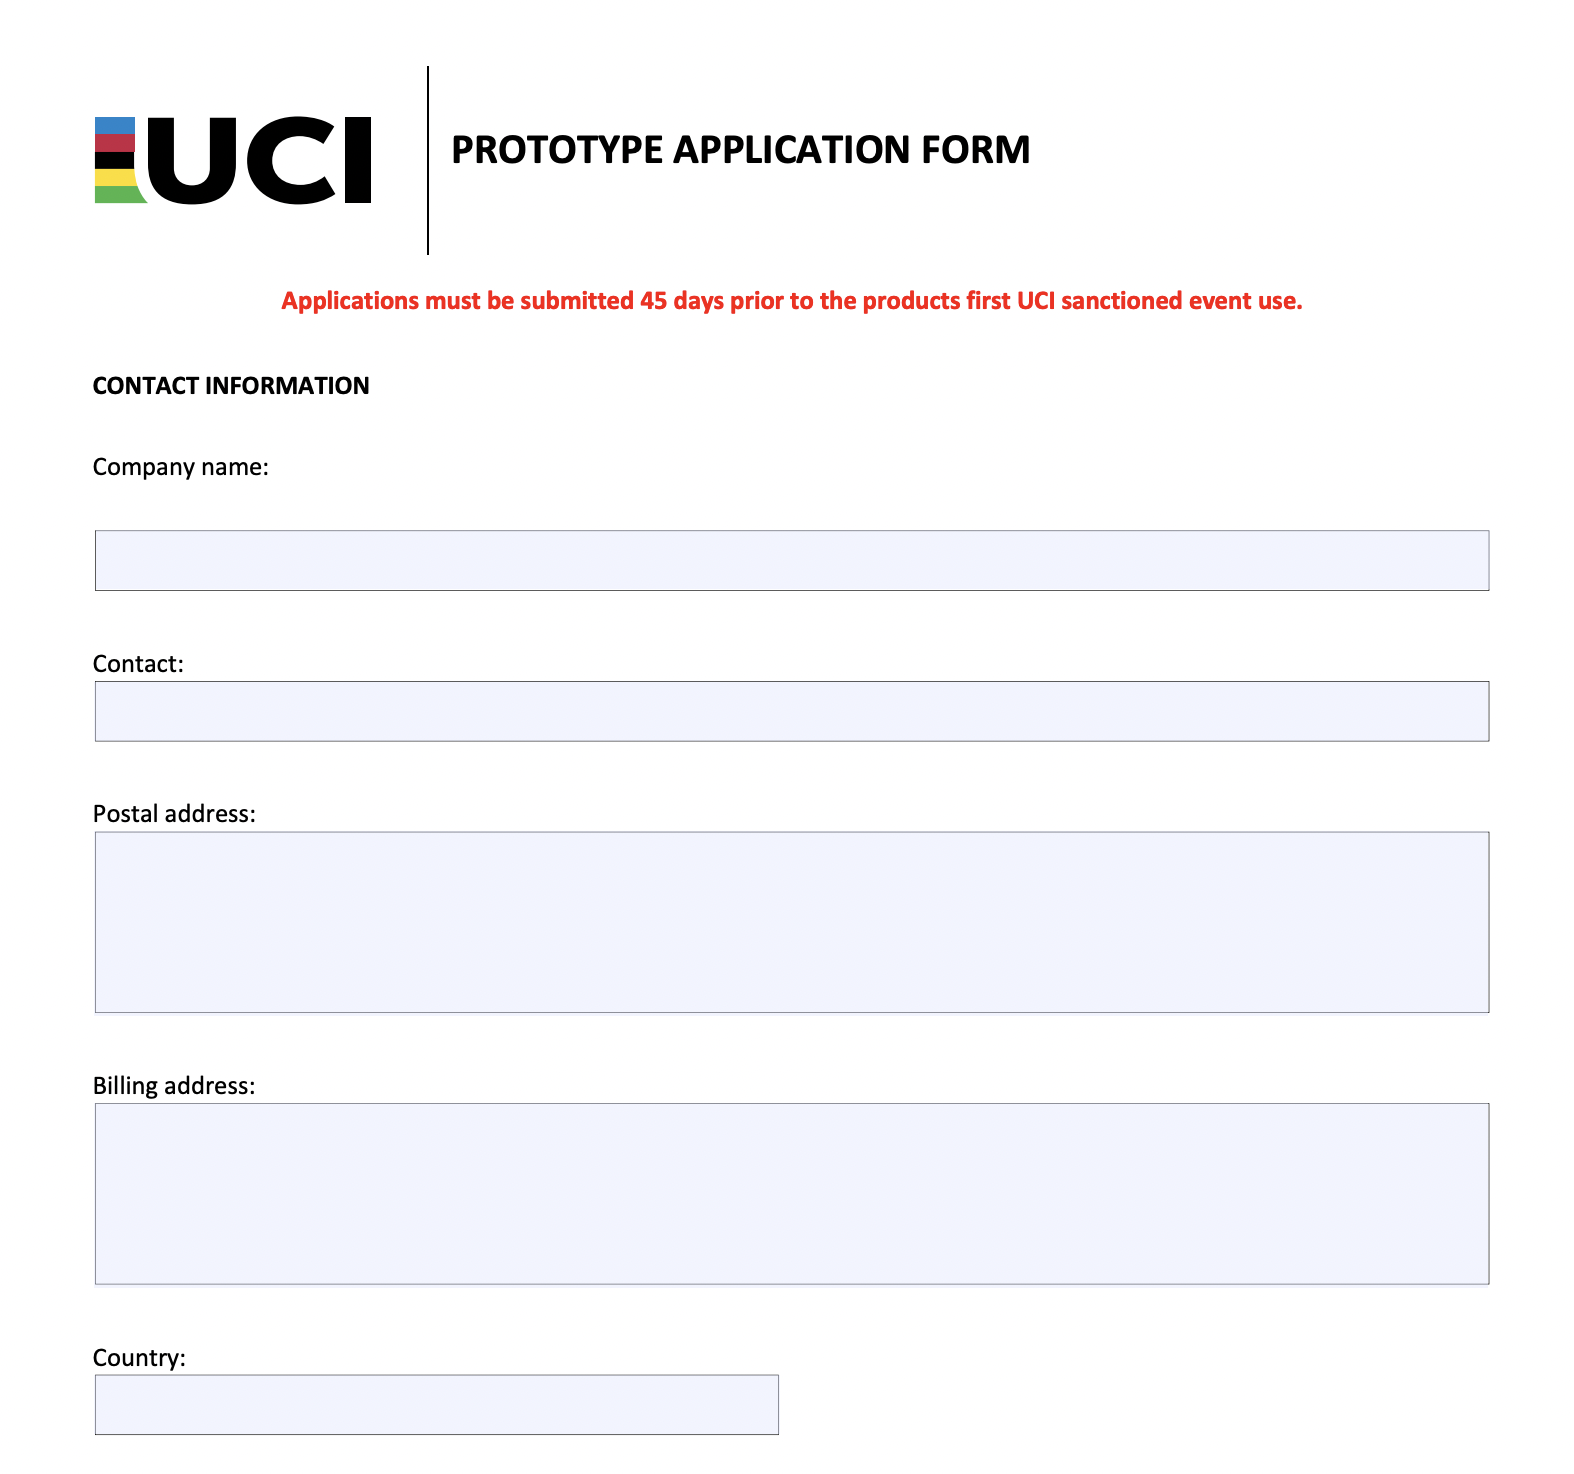 The image shows a screenshot of the UCI's Prototype Application Form with the requirement for applications to be submitted 45 days prior to use in UCI events highlighted in red bold text.